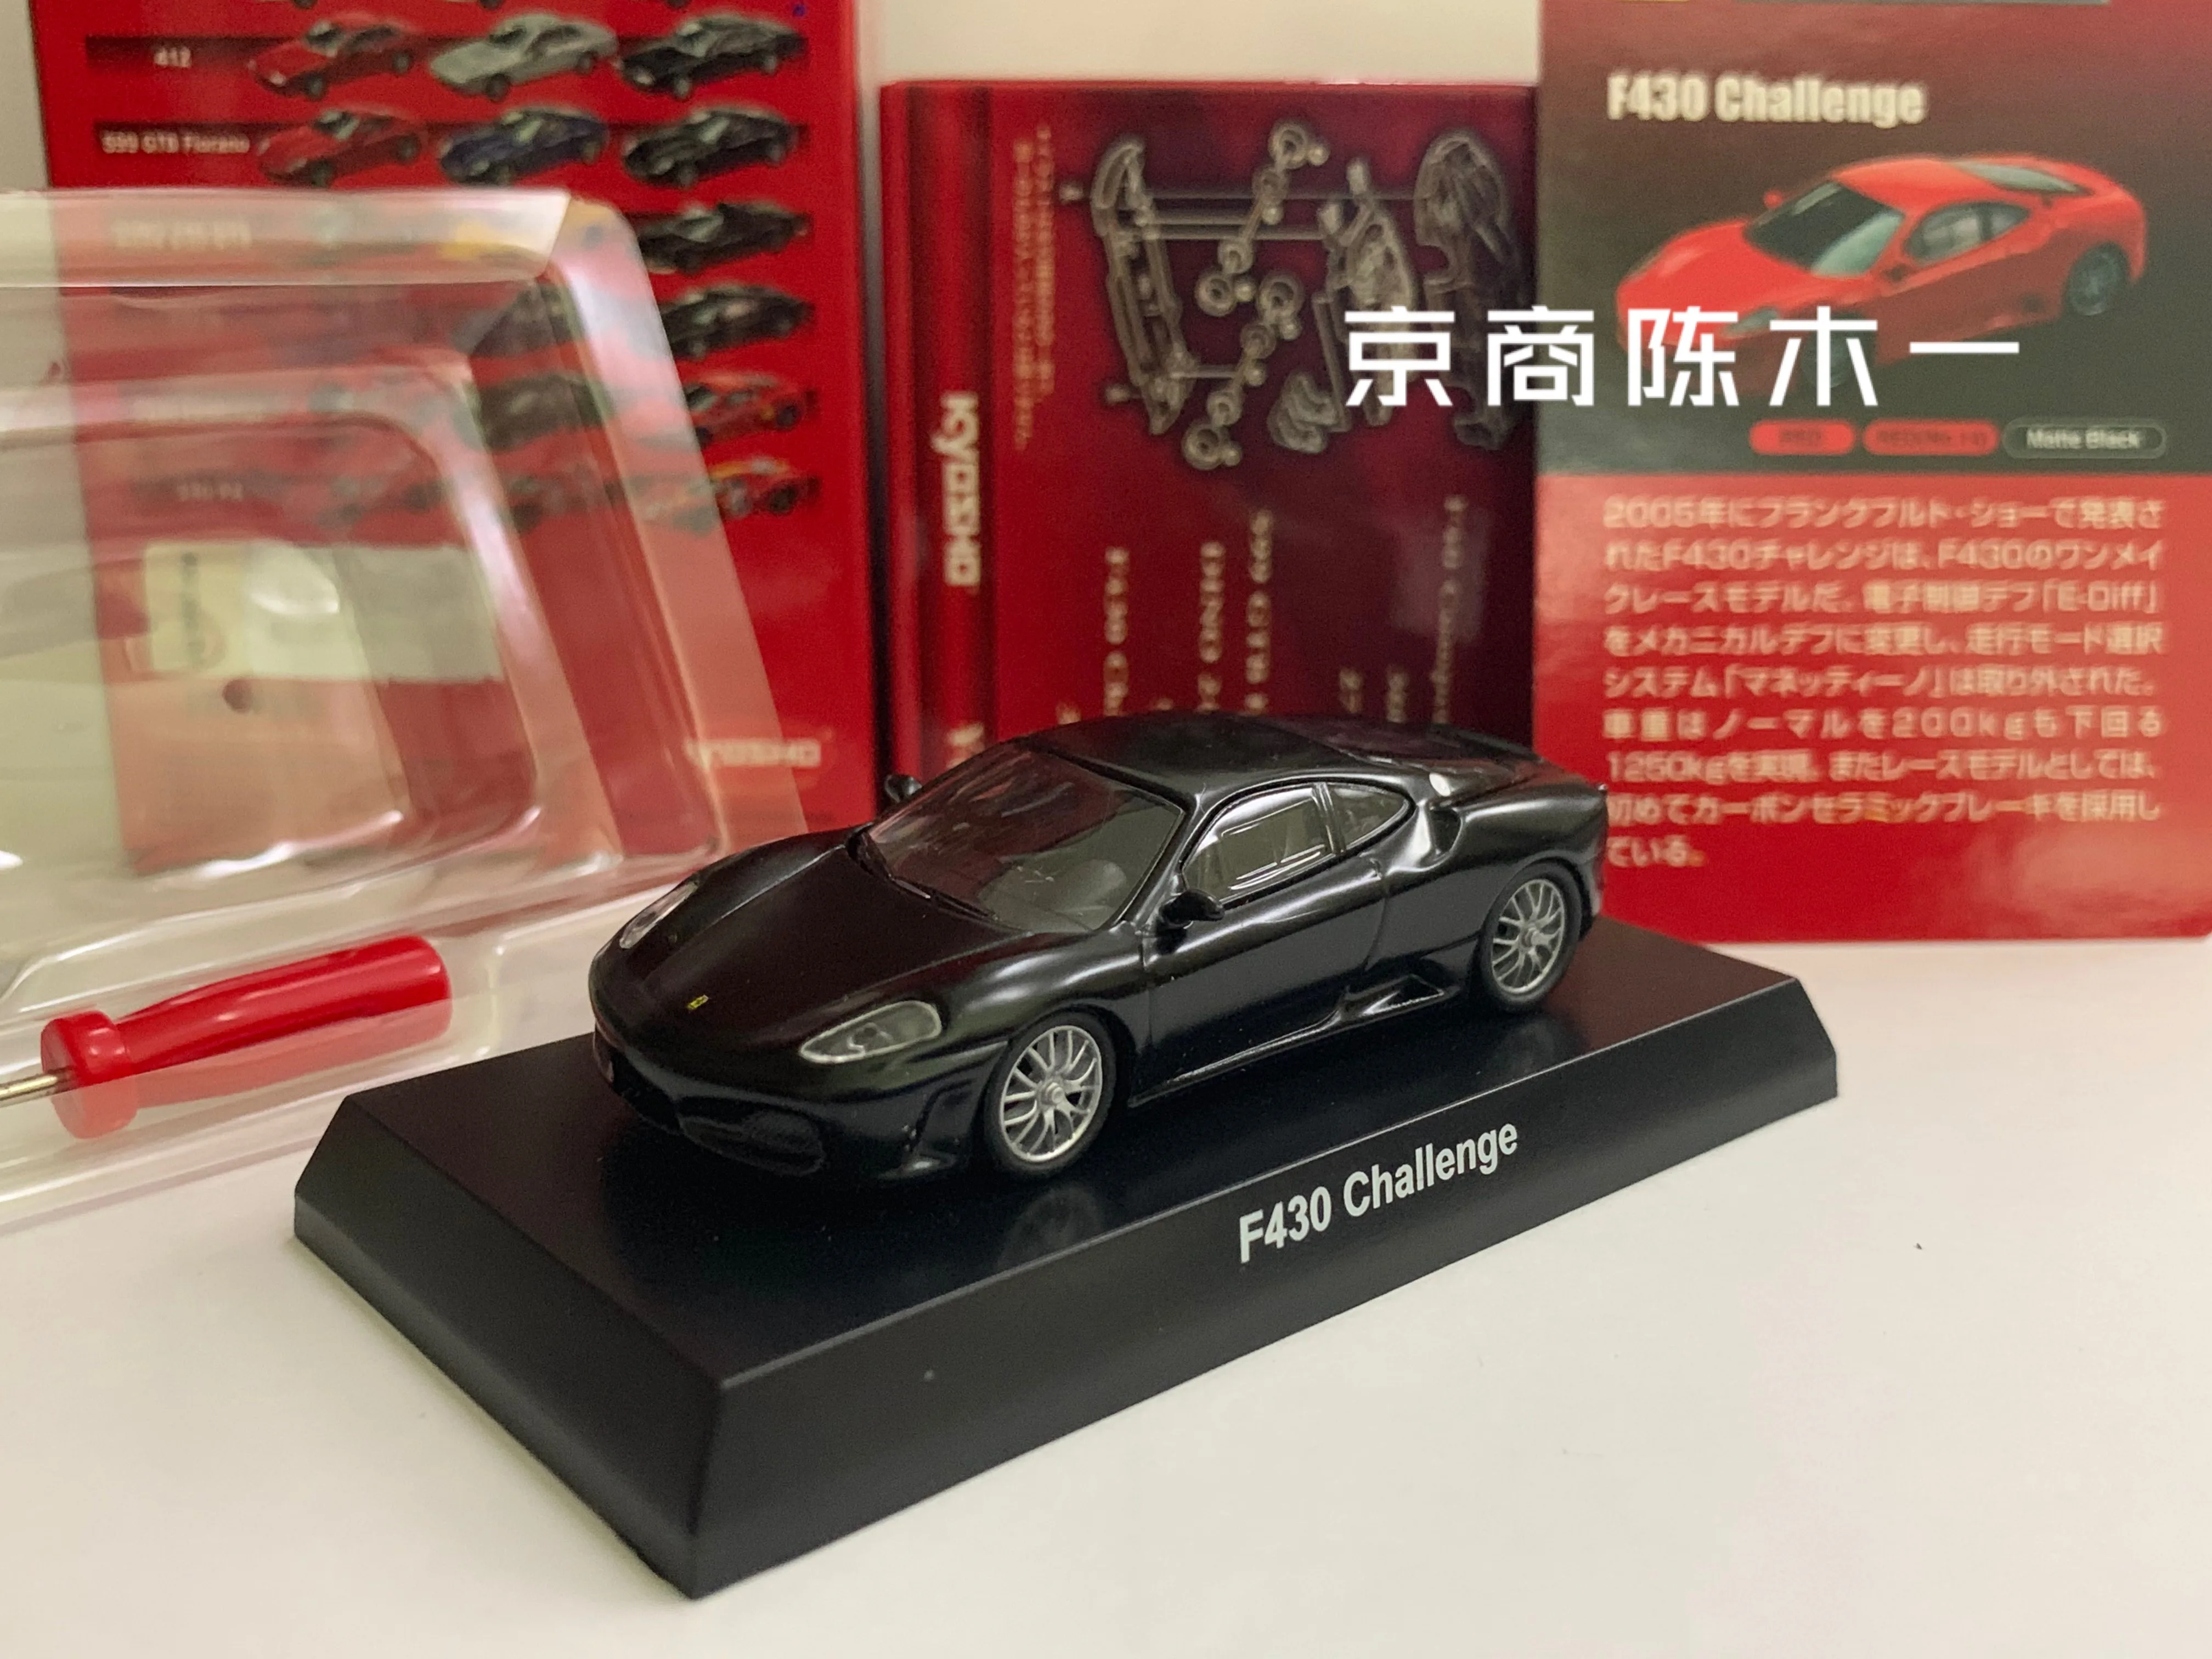 

1/64 KYOSHO Ferrari F430 Challenge Collection of die-cast alloy car decoration model toys